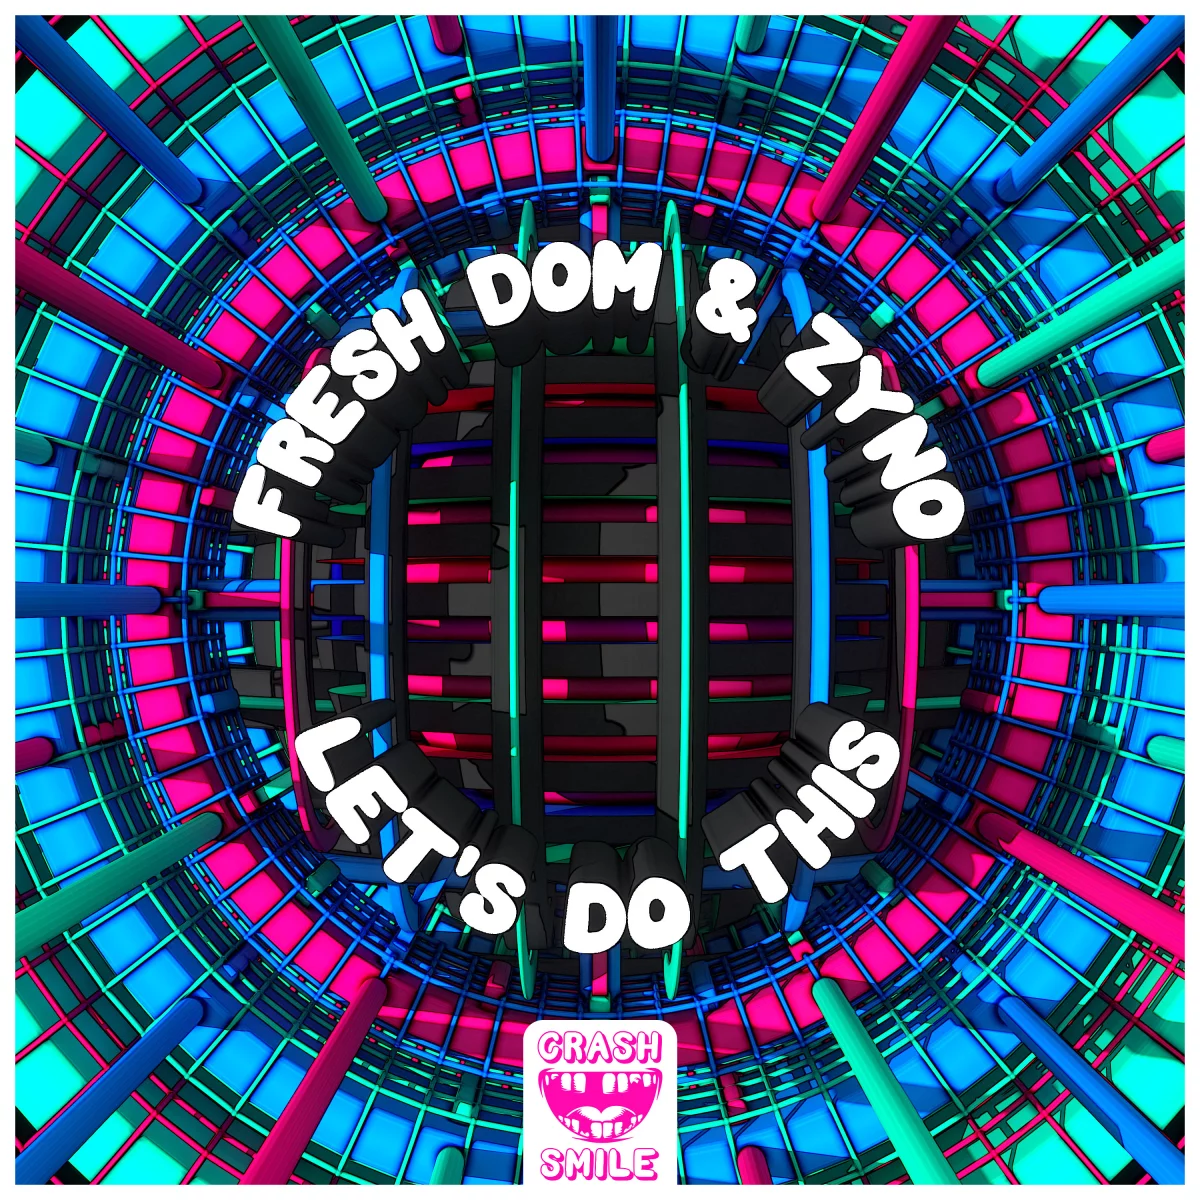 Let's Do This - Fresh Dom⁠ & Zyno⁠ 